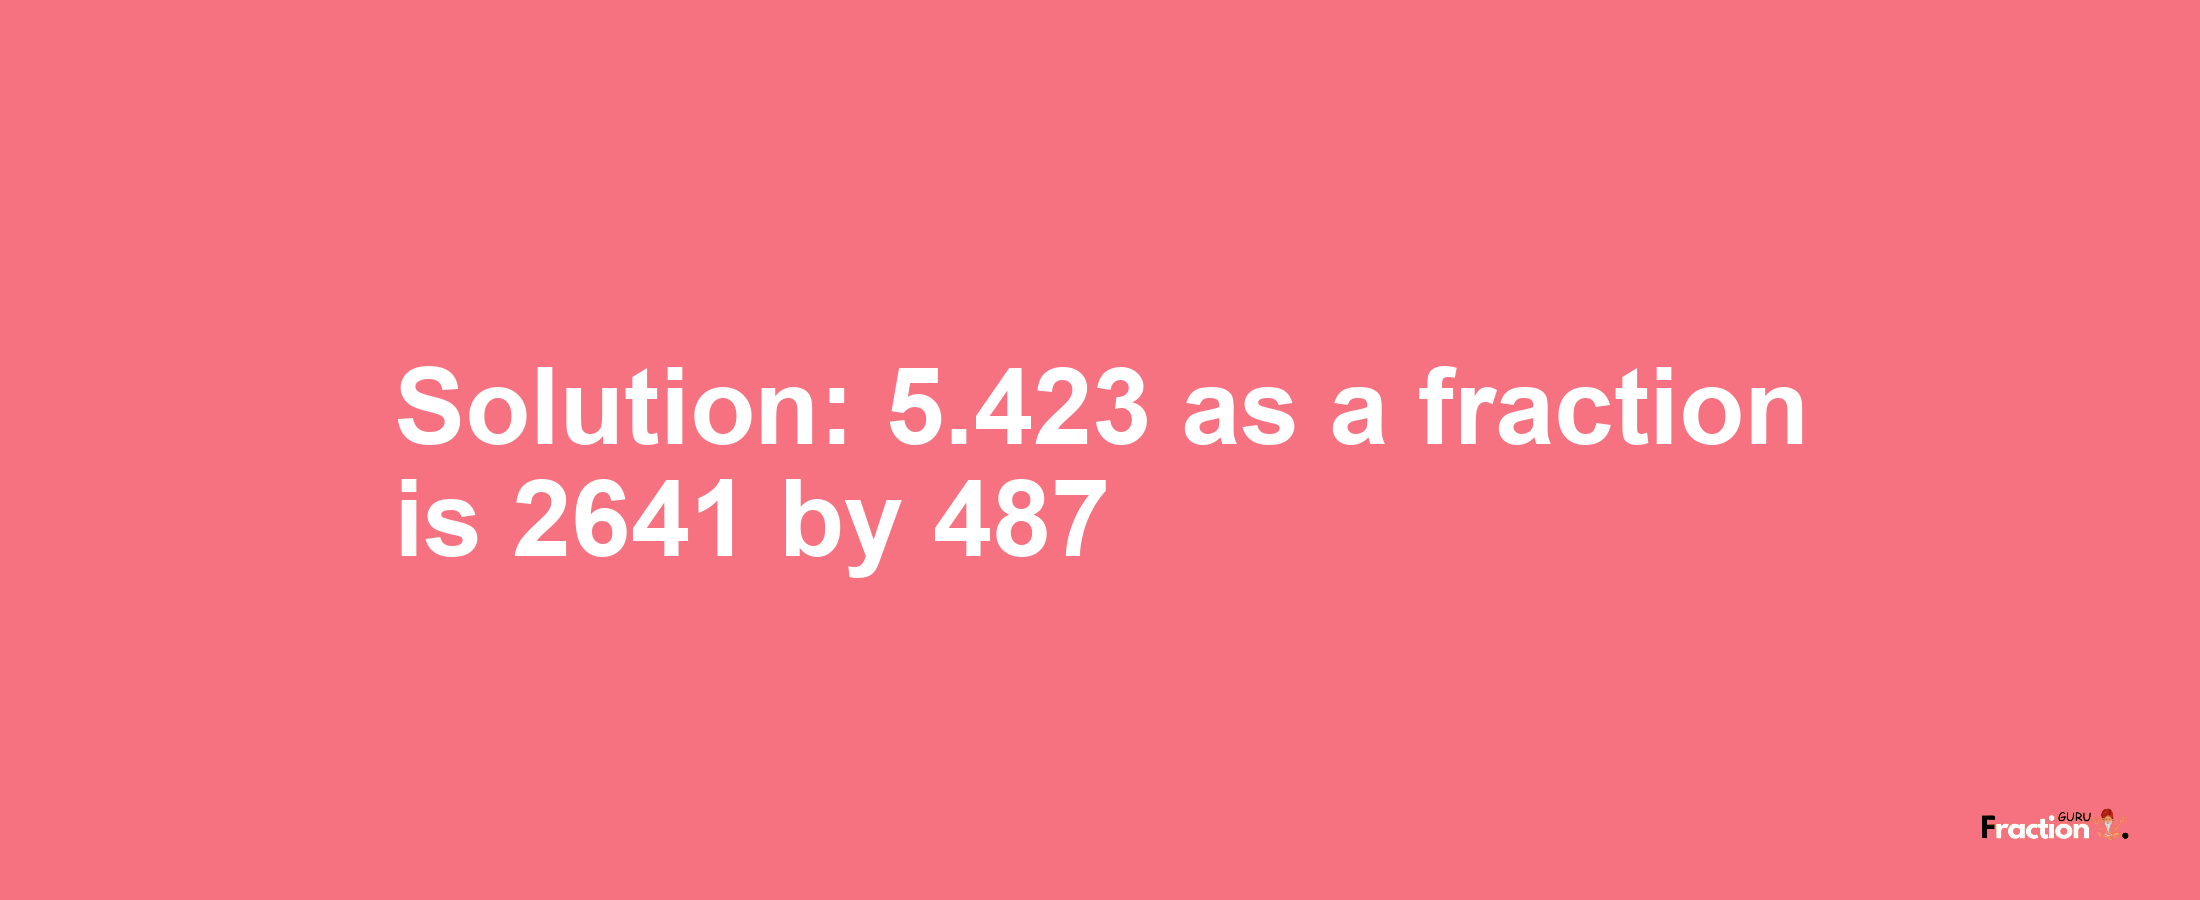 Solution:5.423 as a fraction is 2641/487